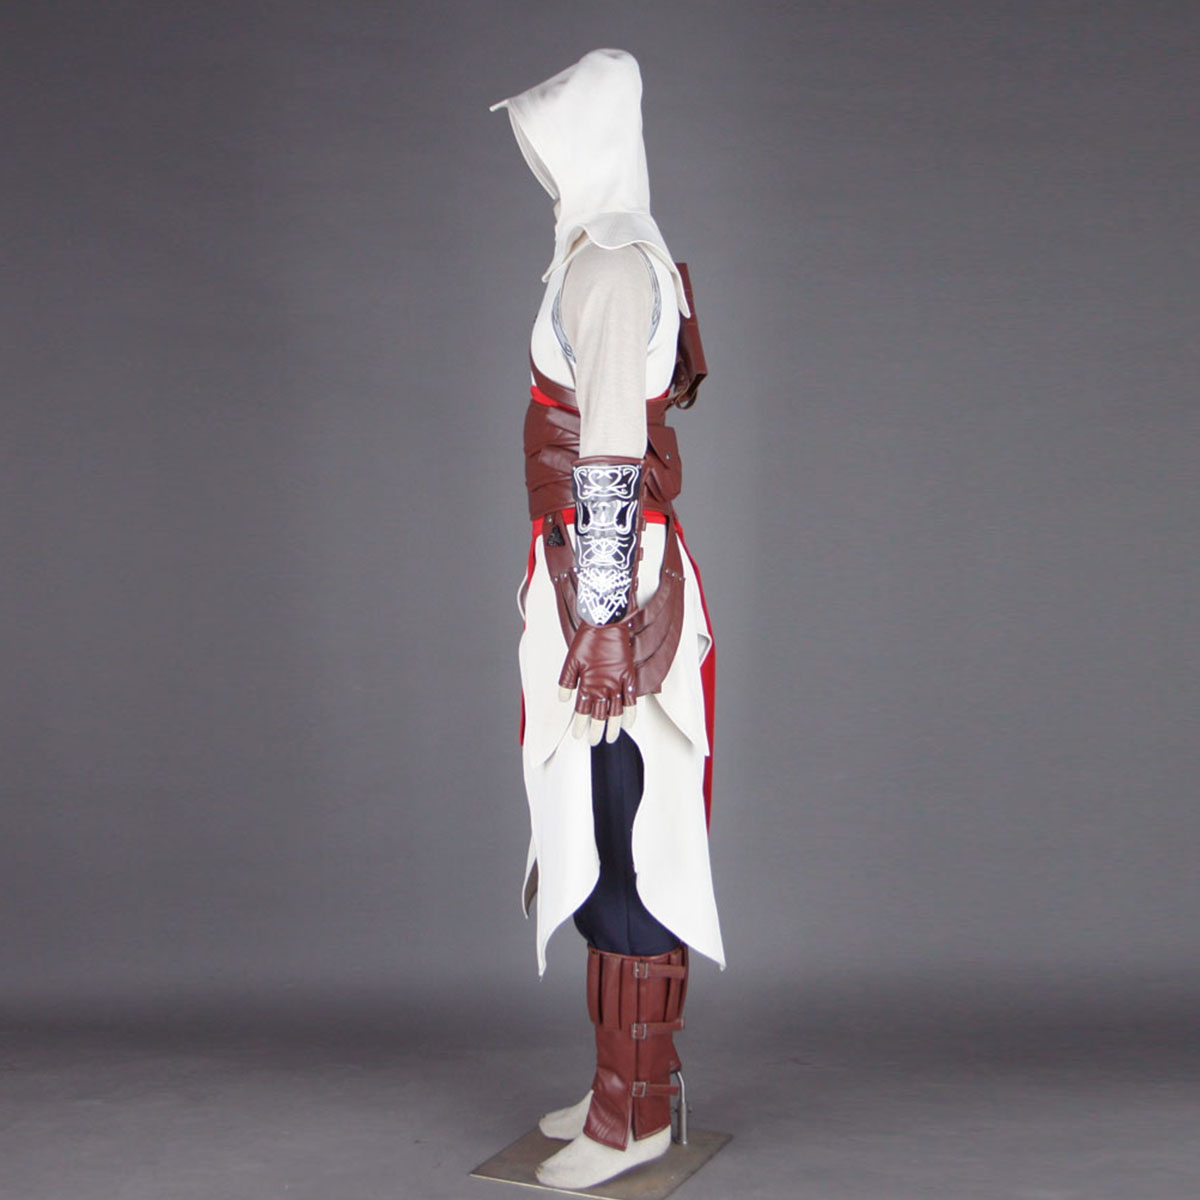 Assassin's Creed Assassin 1 Cosplay Costumes New Zealand Online Store